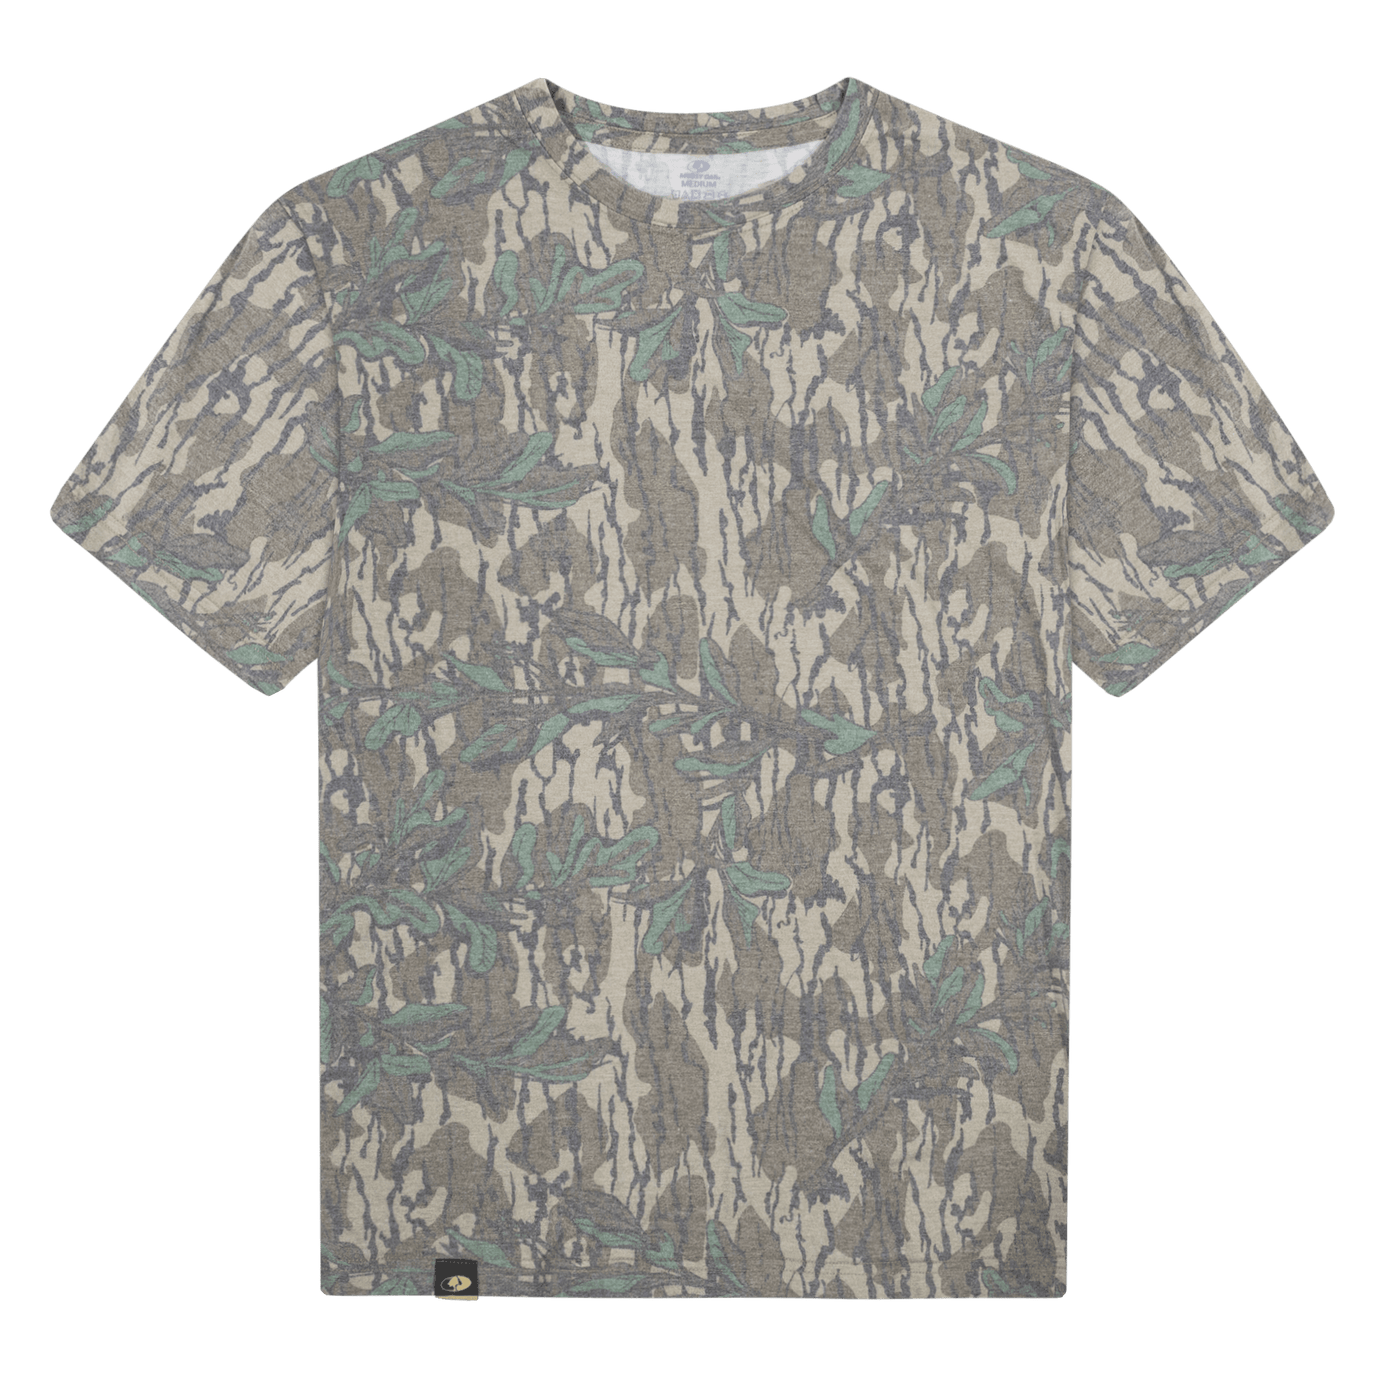 Mossy Oak Washed Out Camo Tee – The Mossy Oak Store